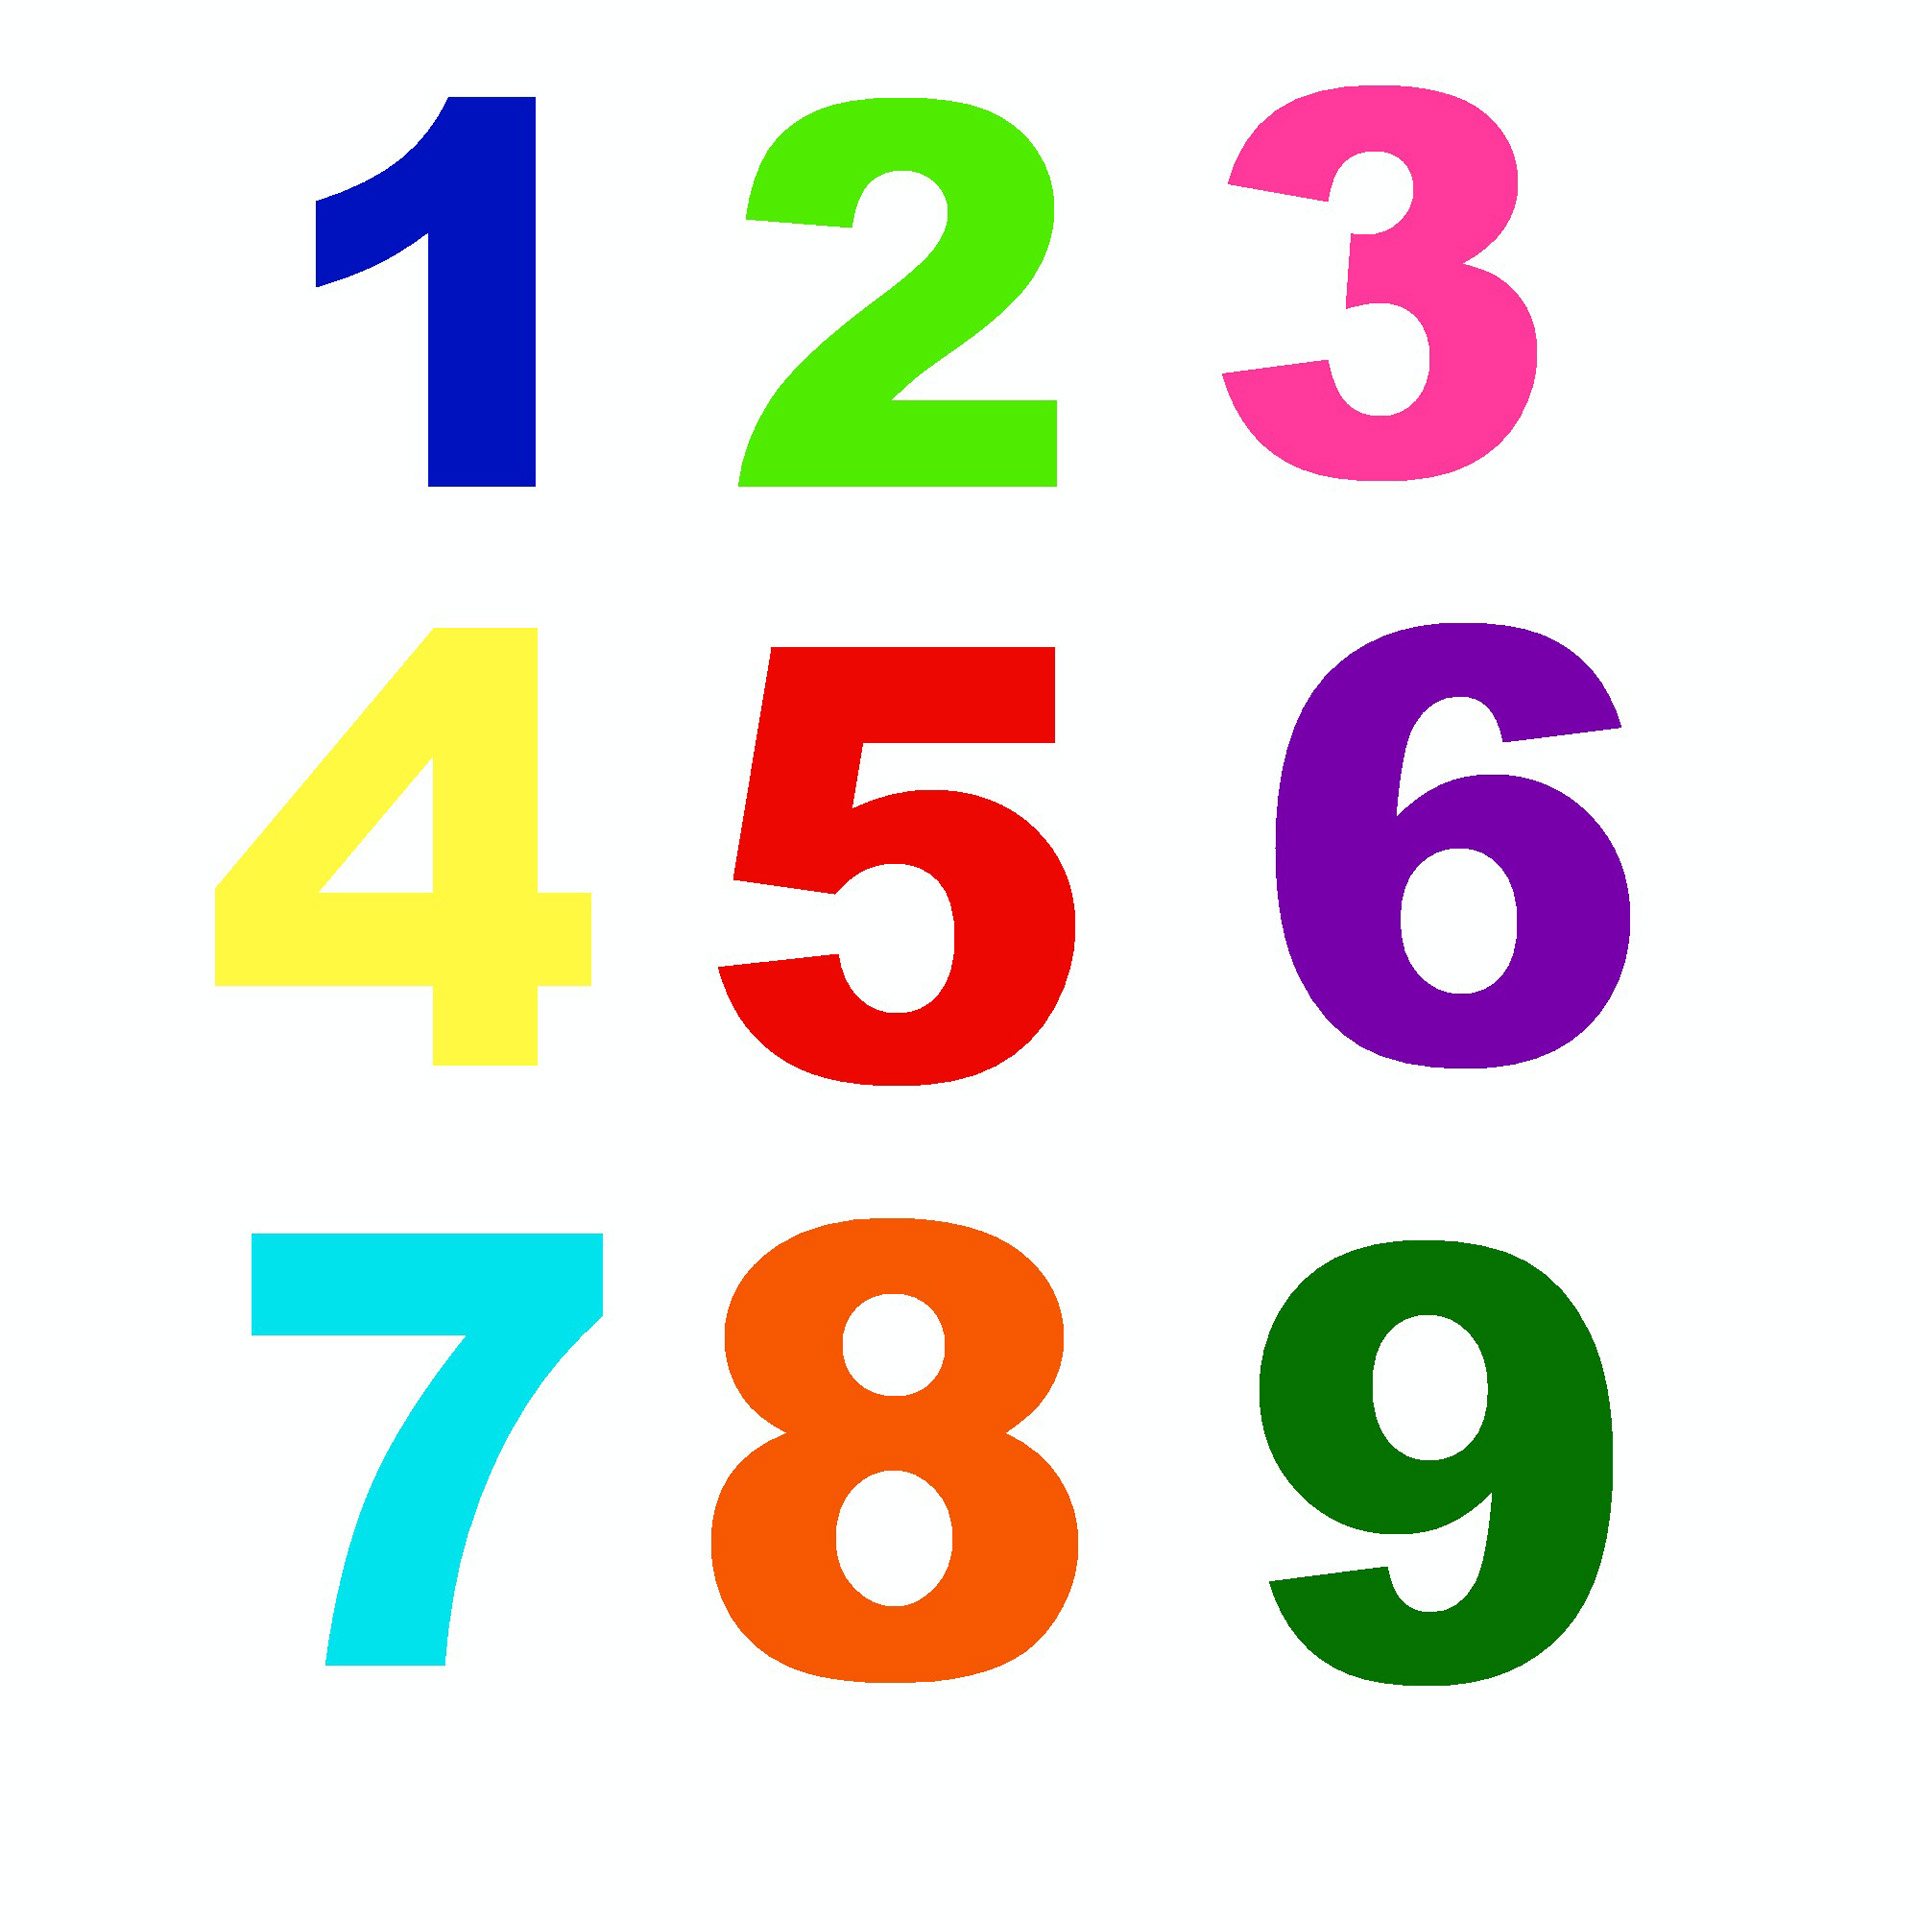 Forming the Number from Given Digits